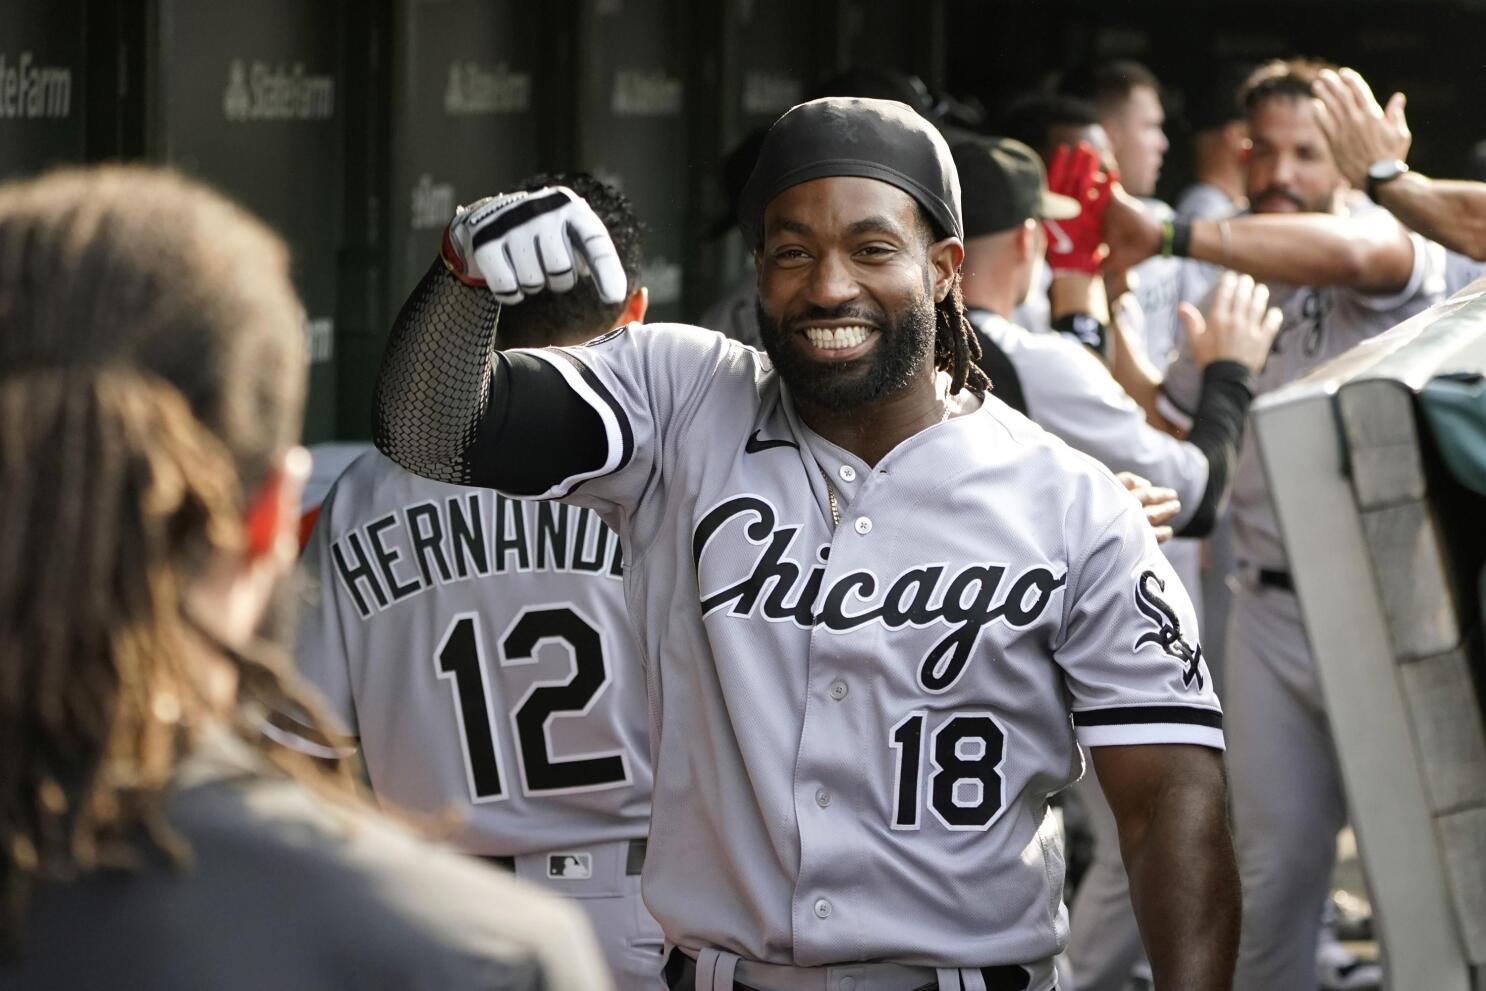 Sheets homers, doubles late to lift White Sox over A's 3-2